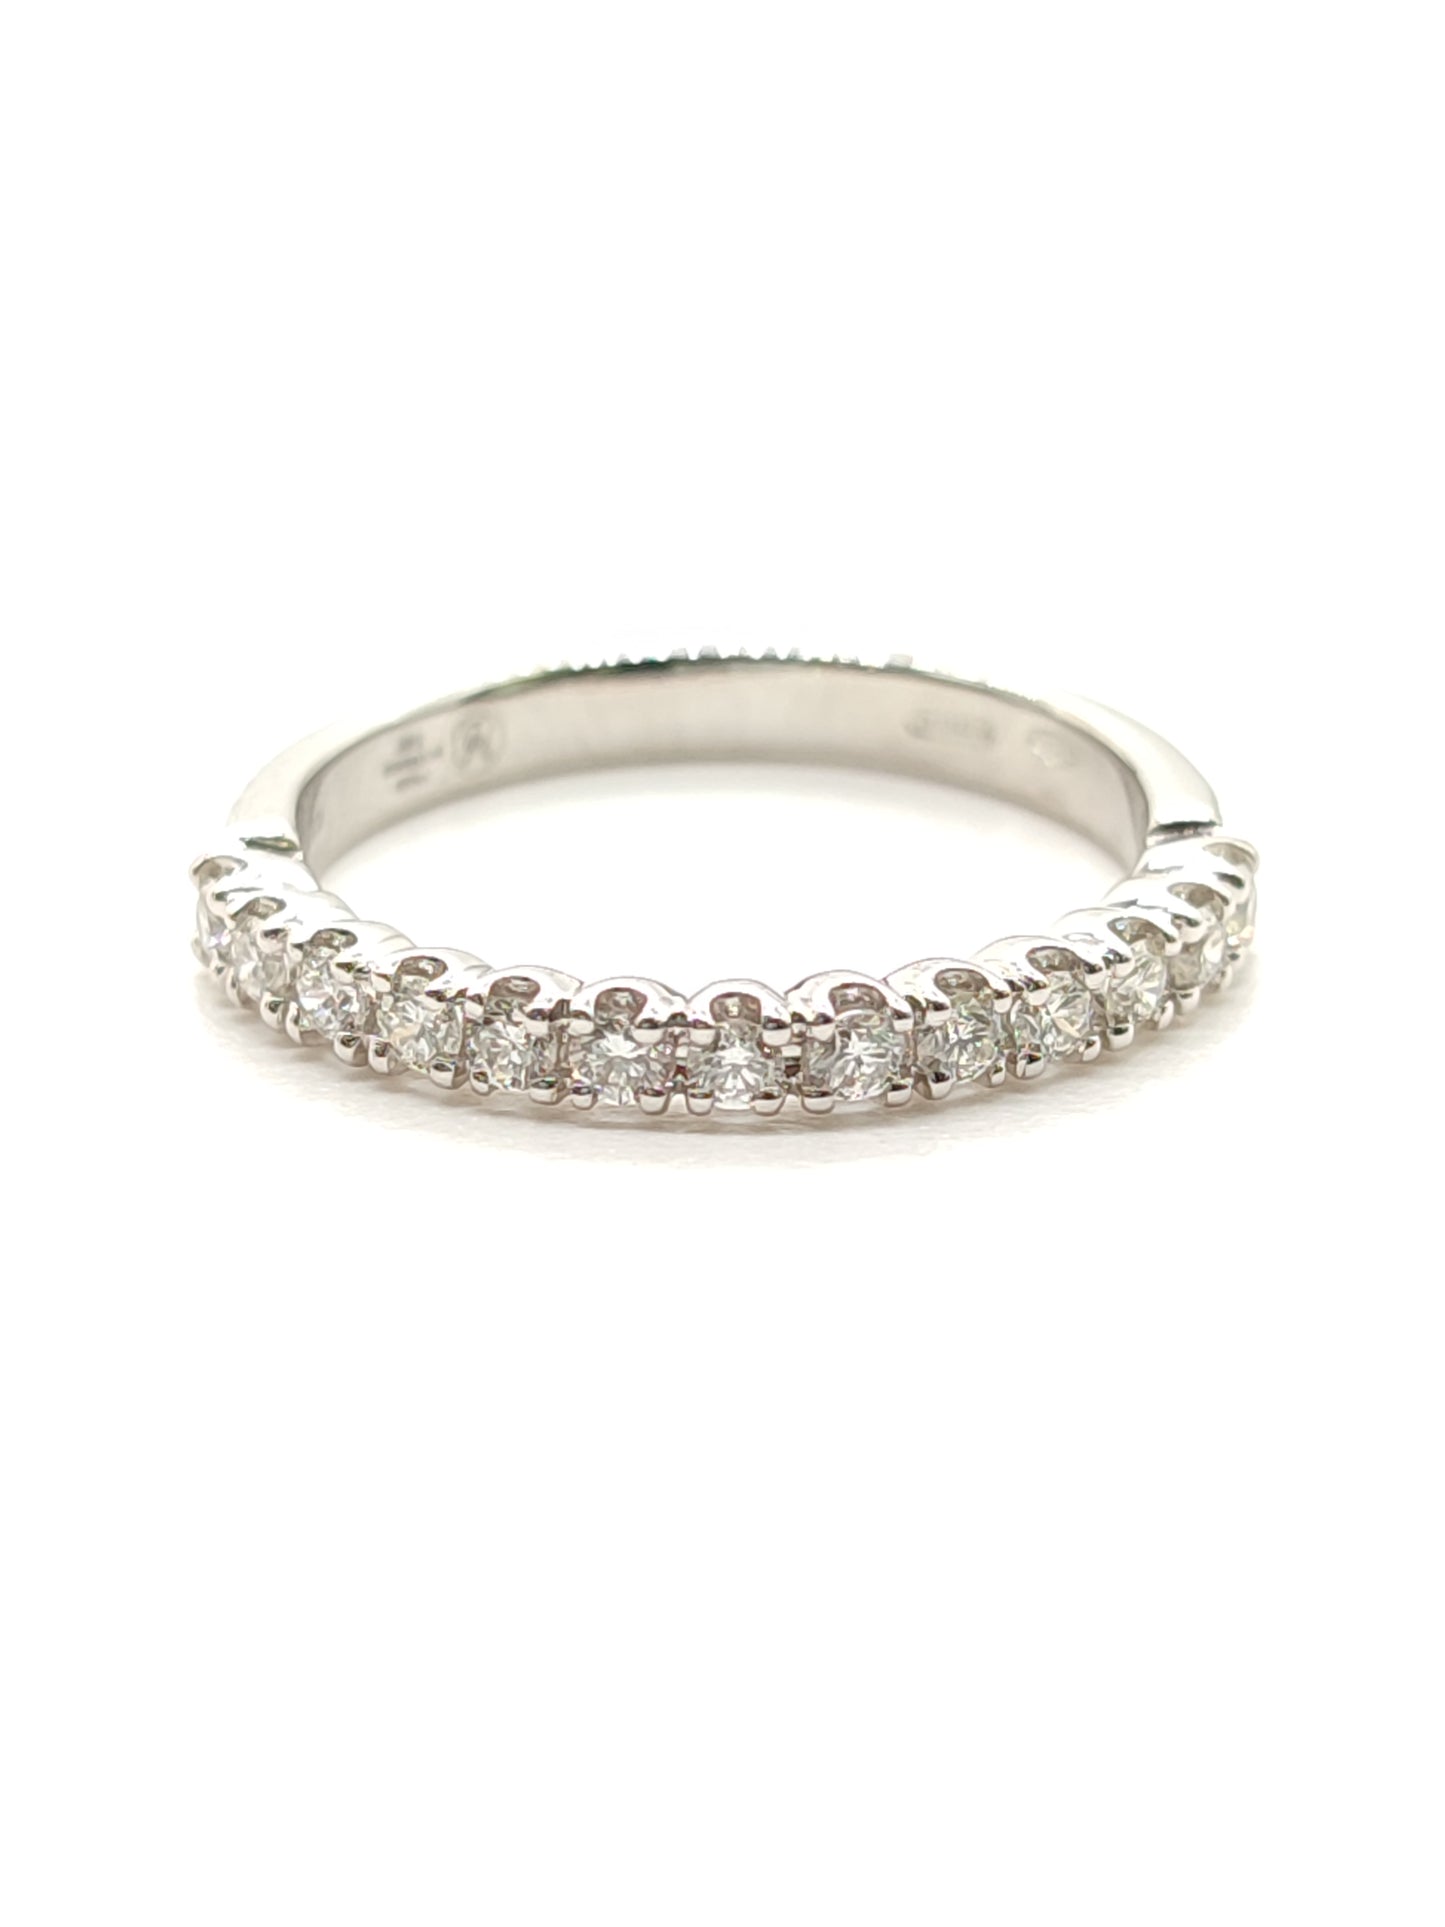 Half wedding band ring in gold with 0.31ct diamonds